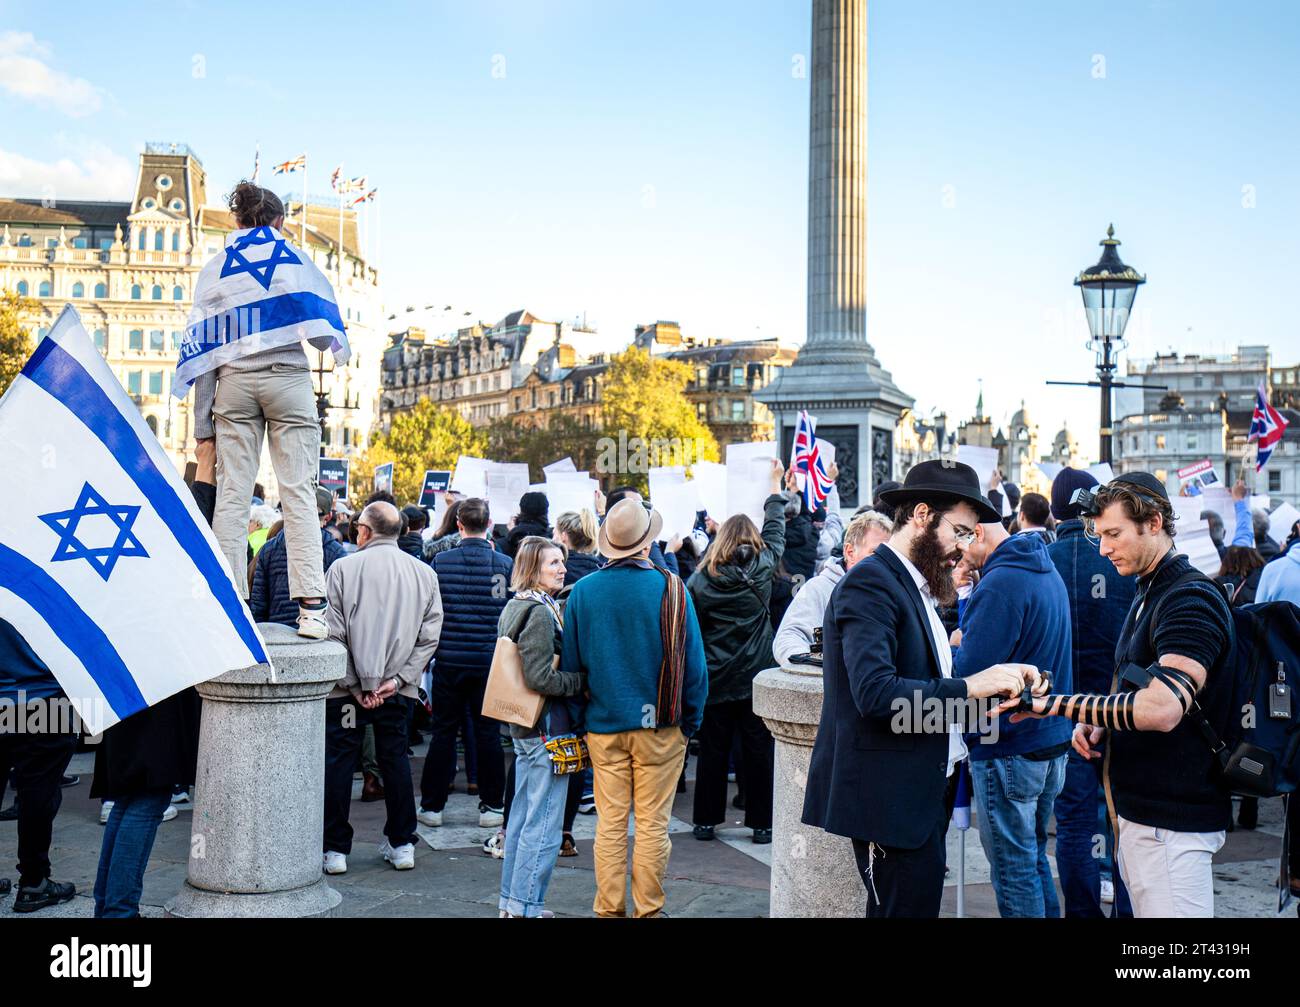 Trafalgar Square London.In the middle of a large demonstration about the Israel/Palestinian conflict an orthodox jew helps a young man ' lay' Tefillin Stock Photo